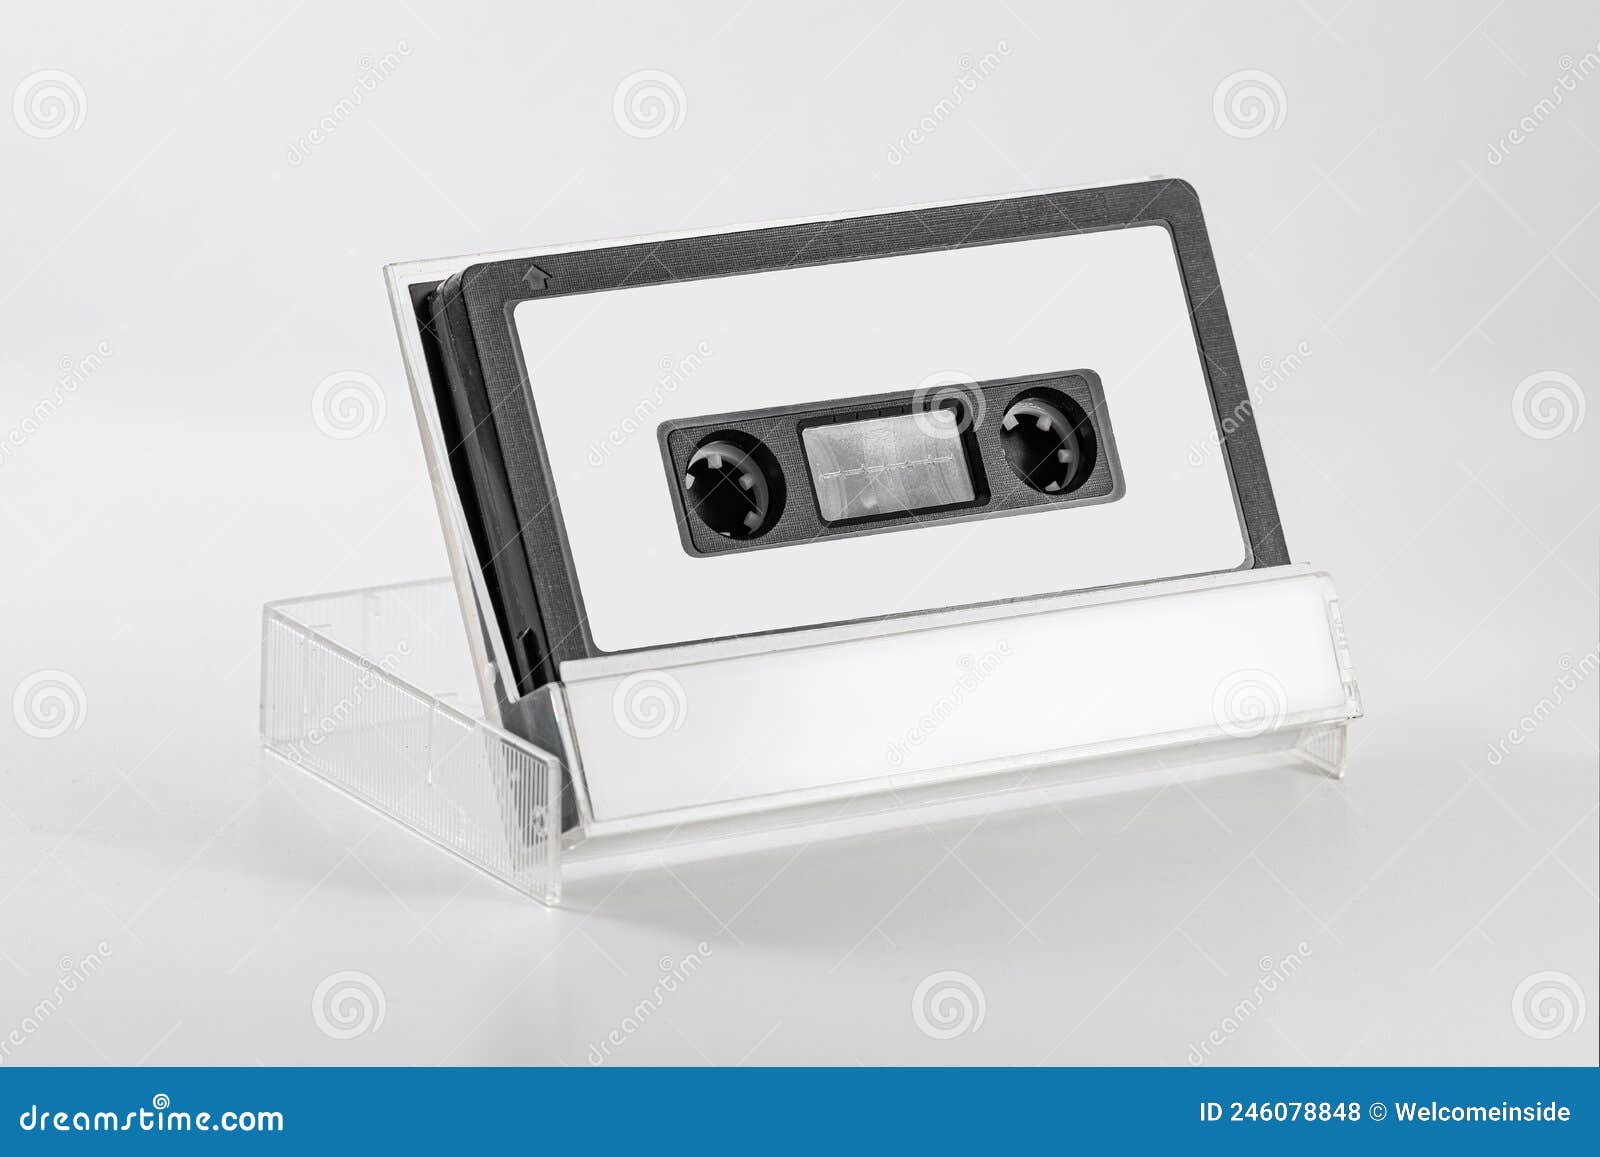 Blank Cassette Tape Box Design Mockup Isolated Profile Side View